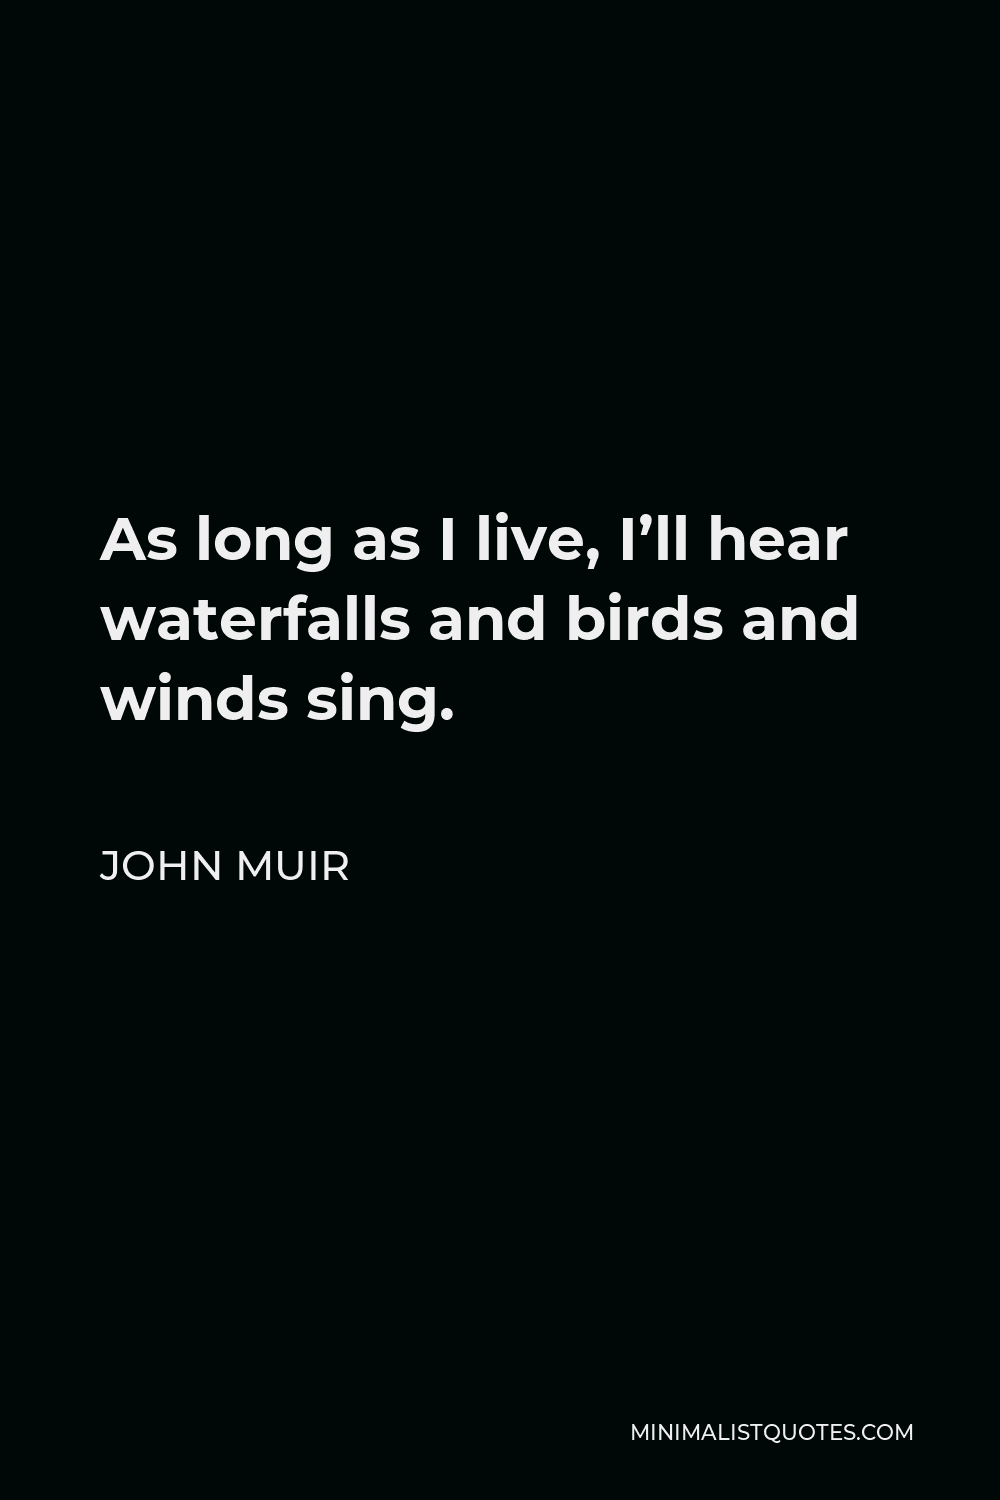 John Muir Quote - As long as I live, I’ll hear waterfalls and birds and winds sing.